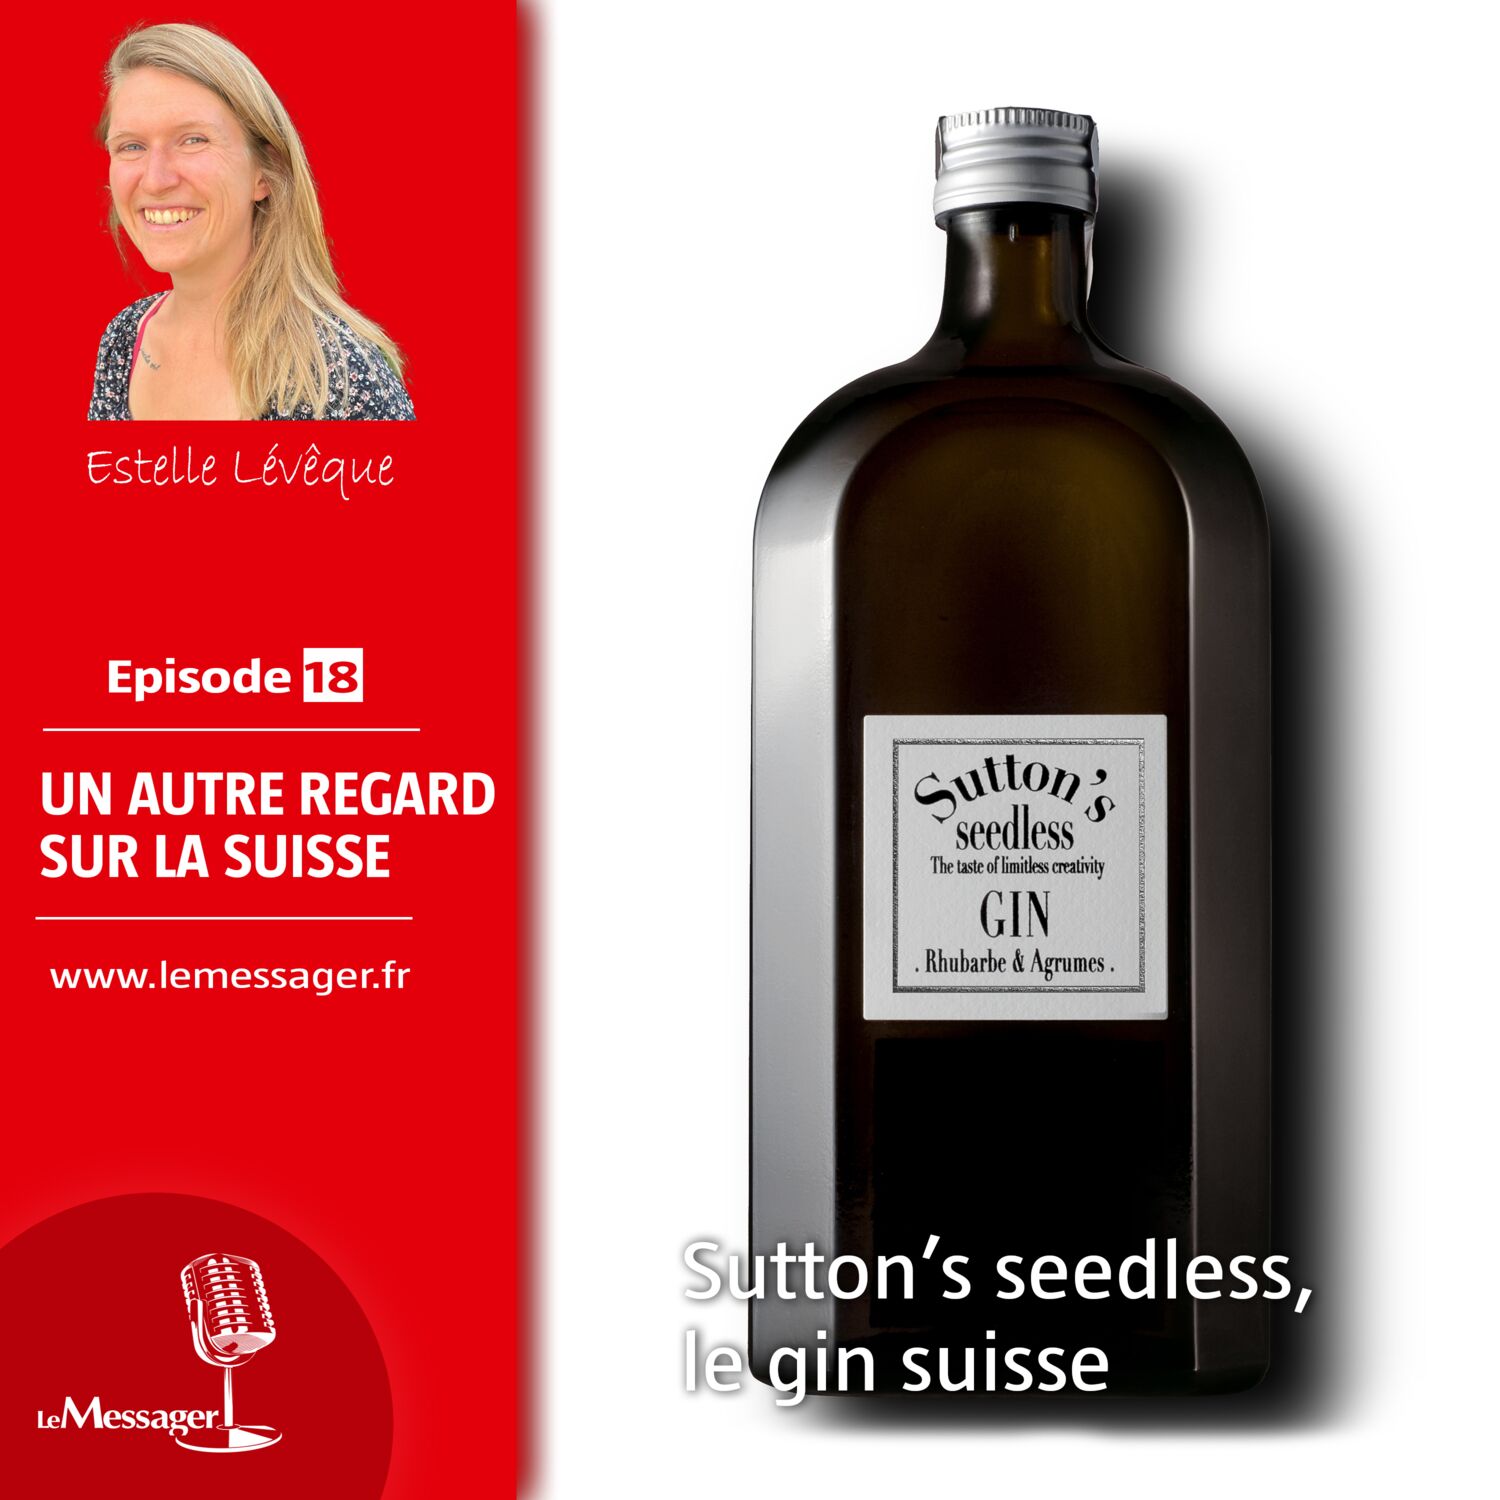 Sutton's seedless, le gin suisse